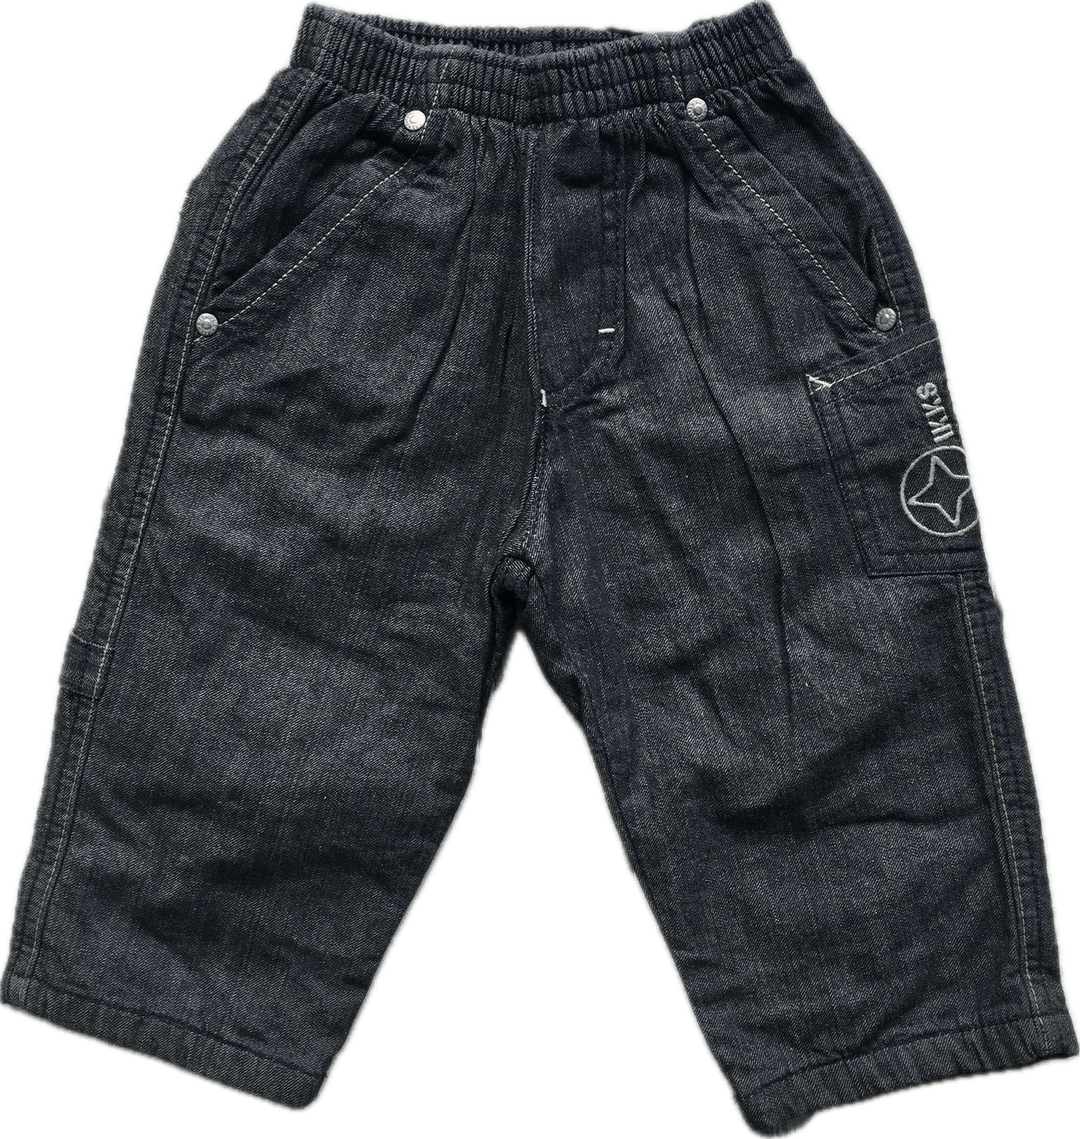 NWT - Made in France IKKS Lined Pull on Boys Jeans - Size 12M - Jean Pool